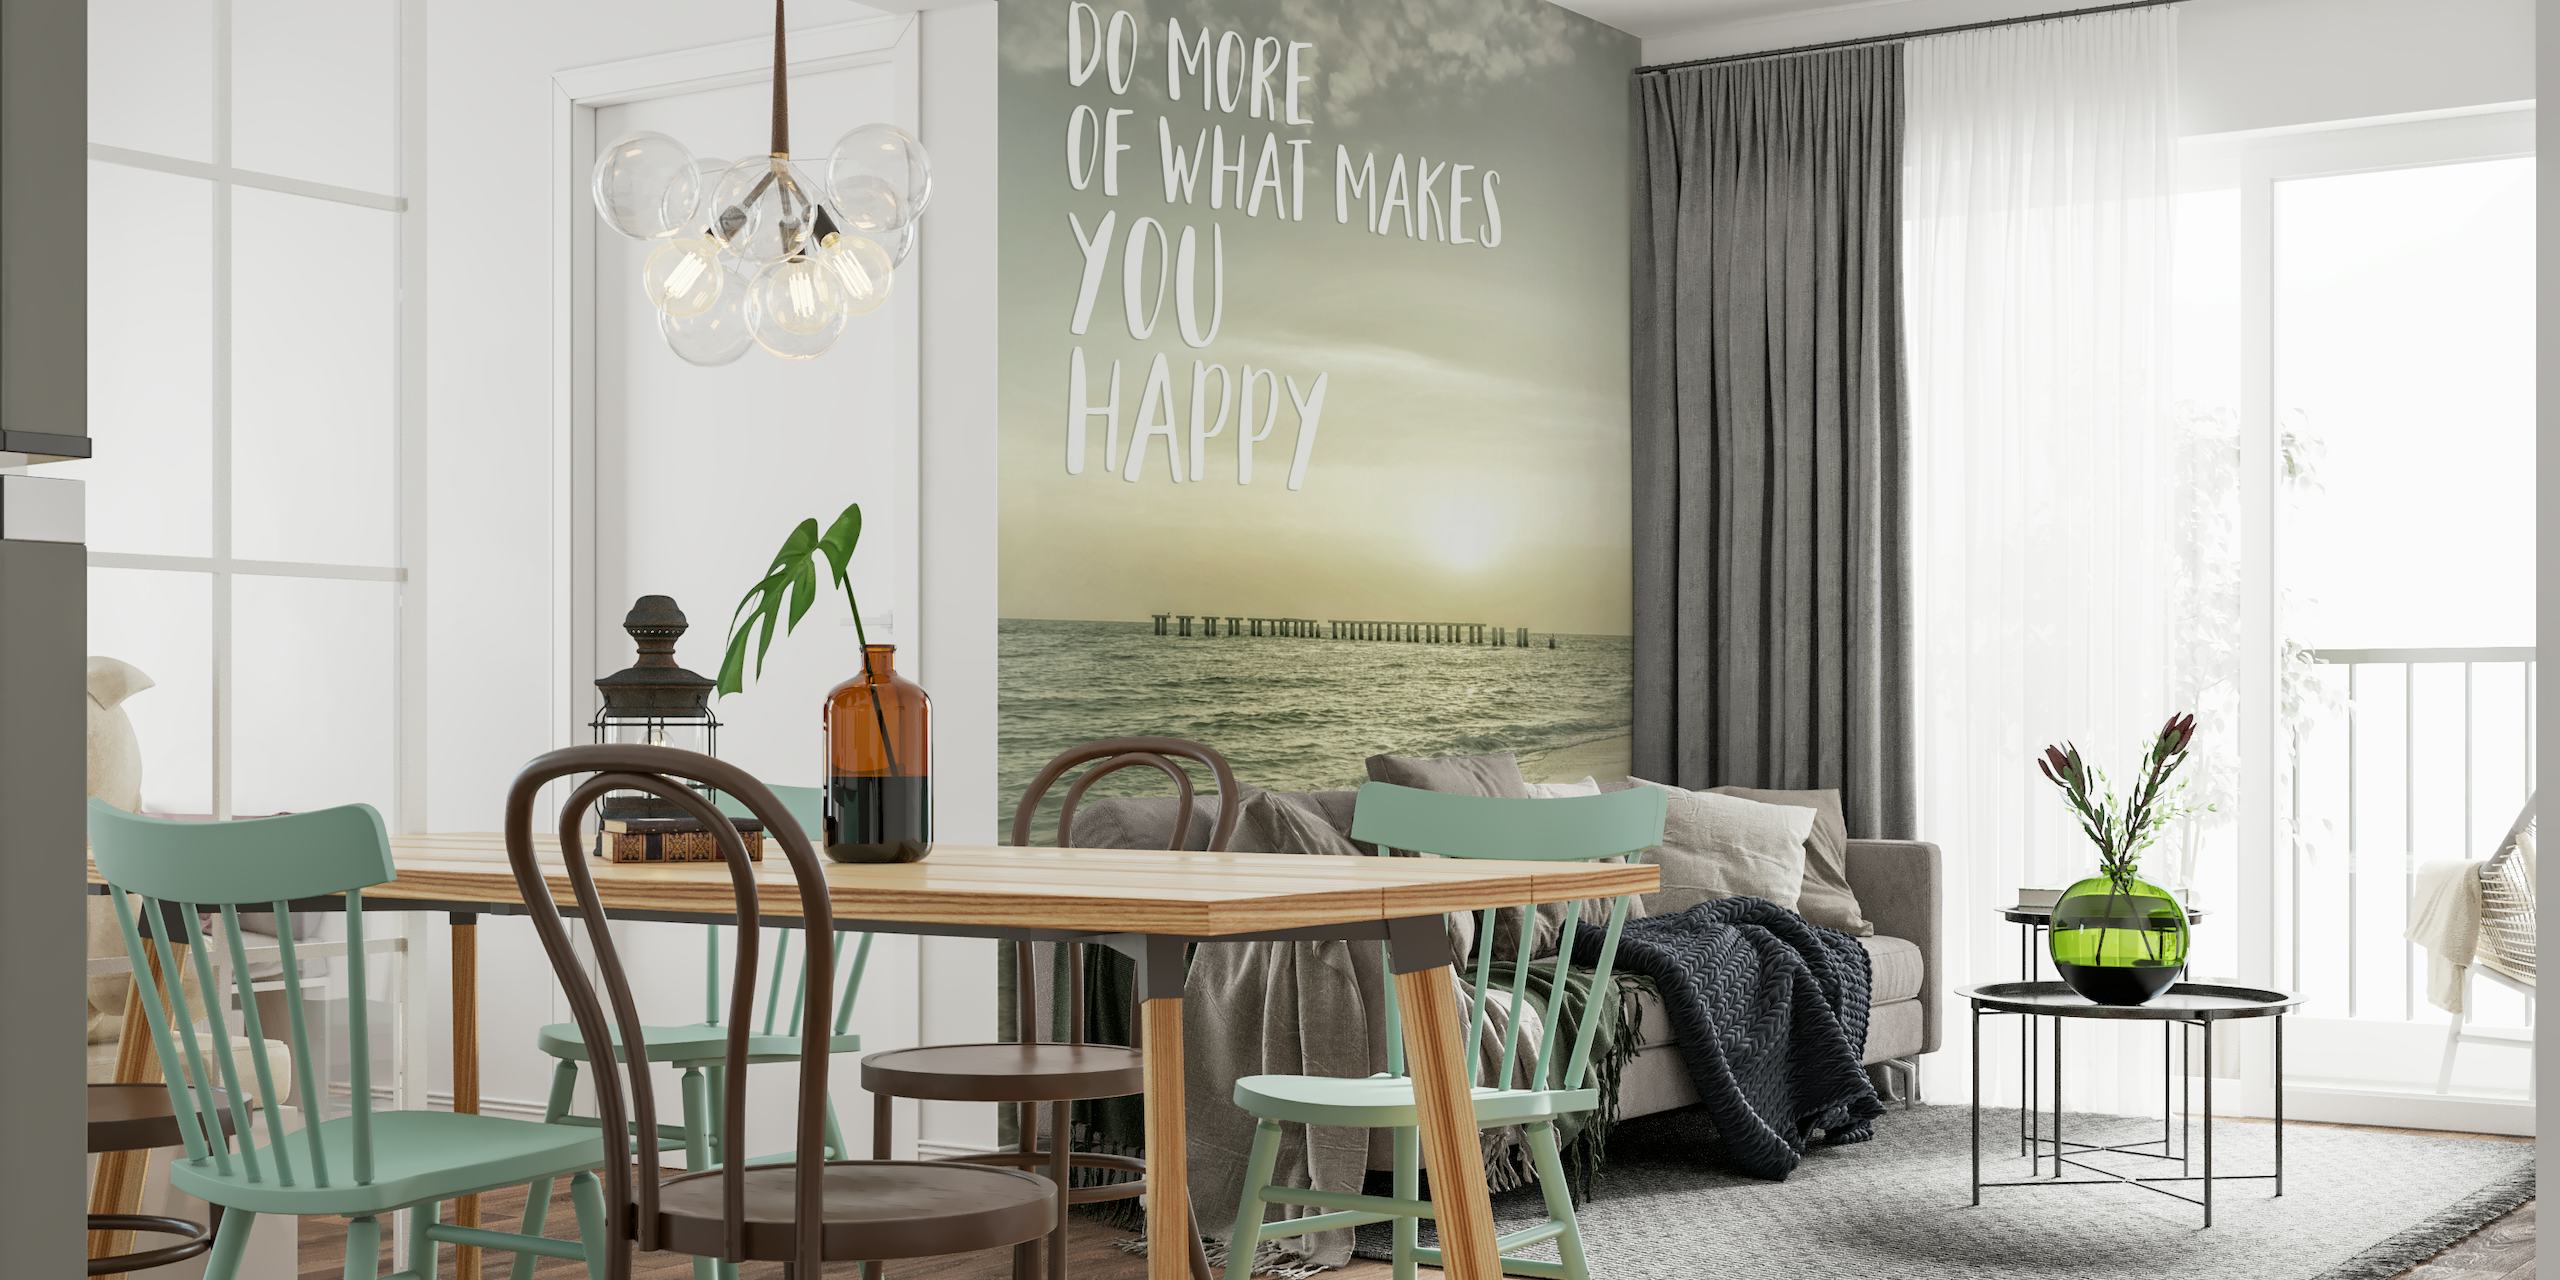 Do more of what makes you happy | Sunset papiers peint